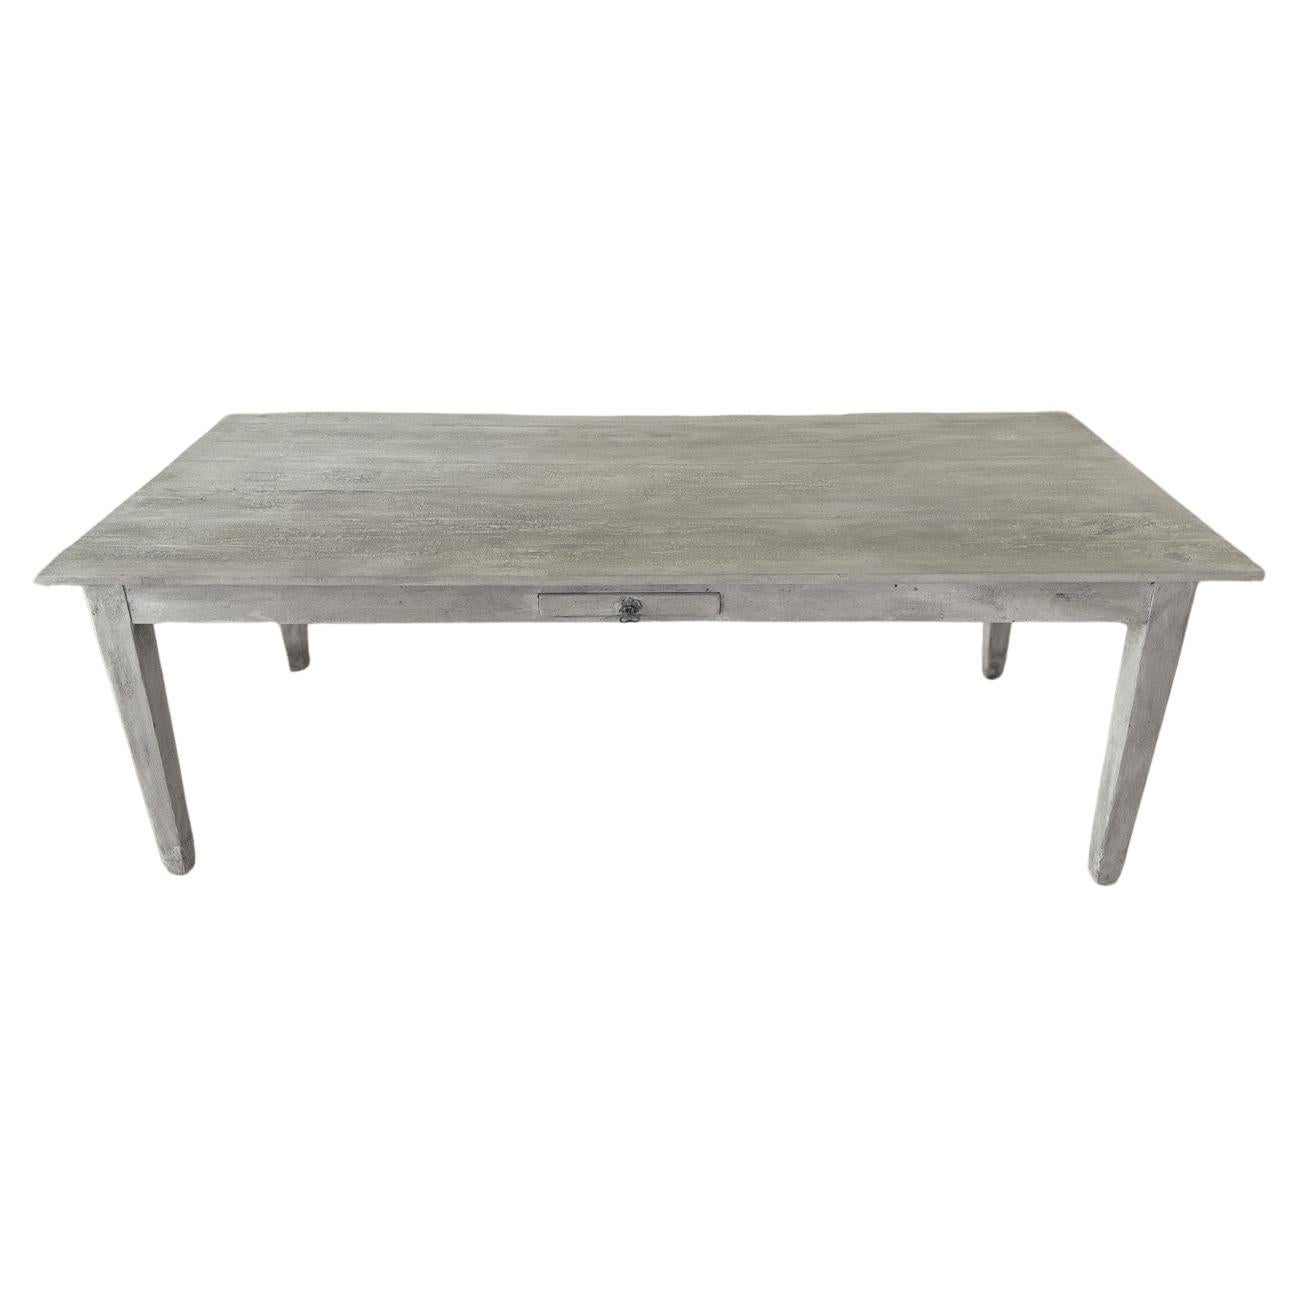 Custom Made Plank Top Farm Table with a Painted Finish For Sale